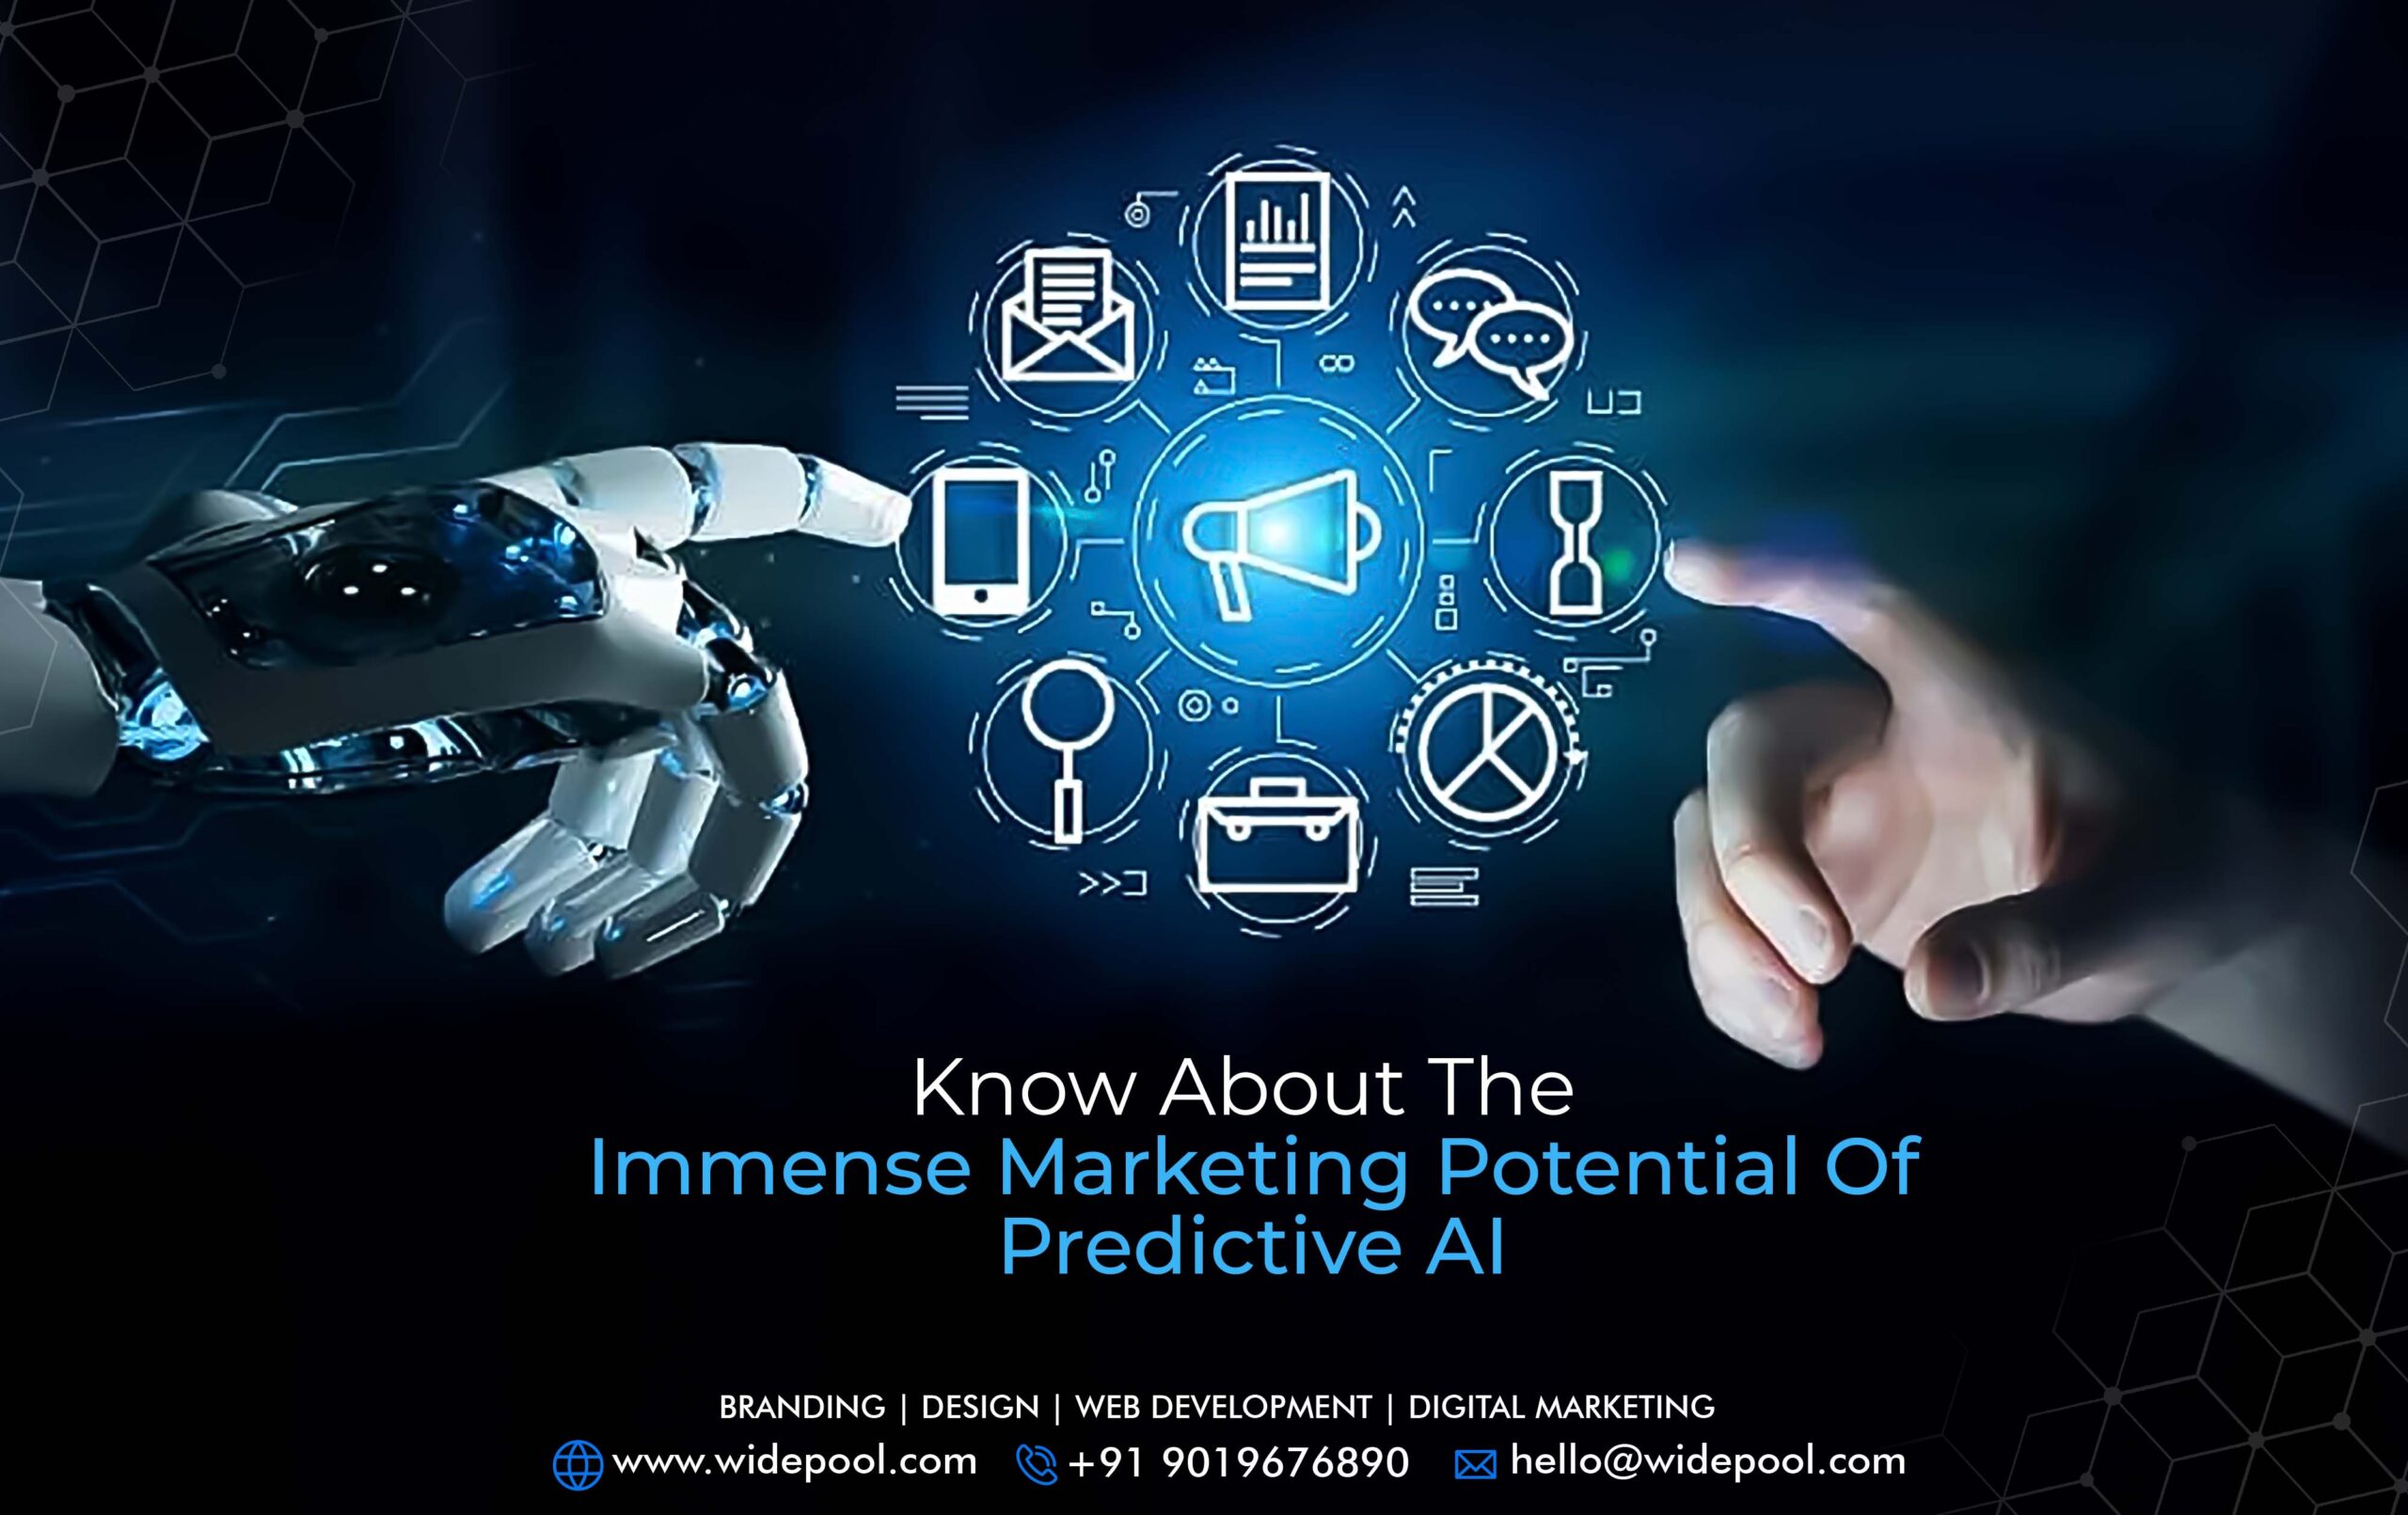 Know about the Immense Marketing Potential of Predictive AI